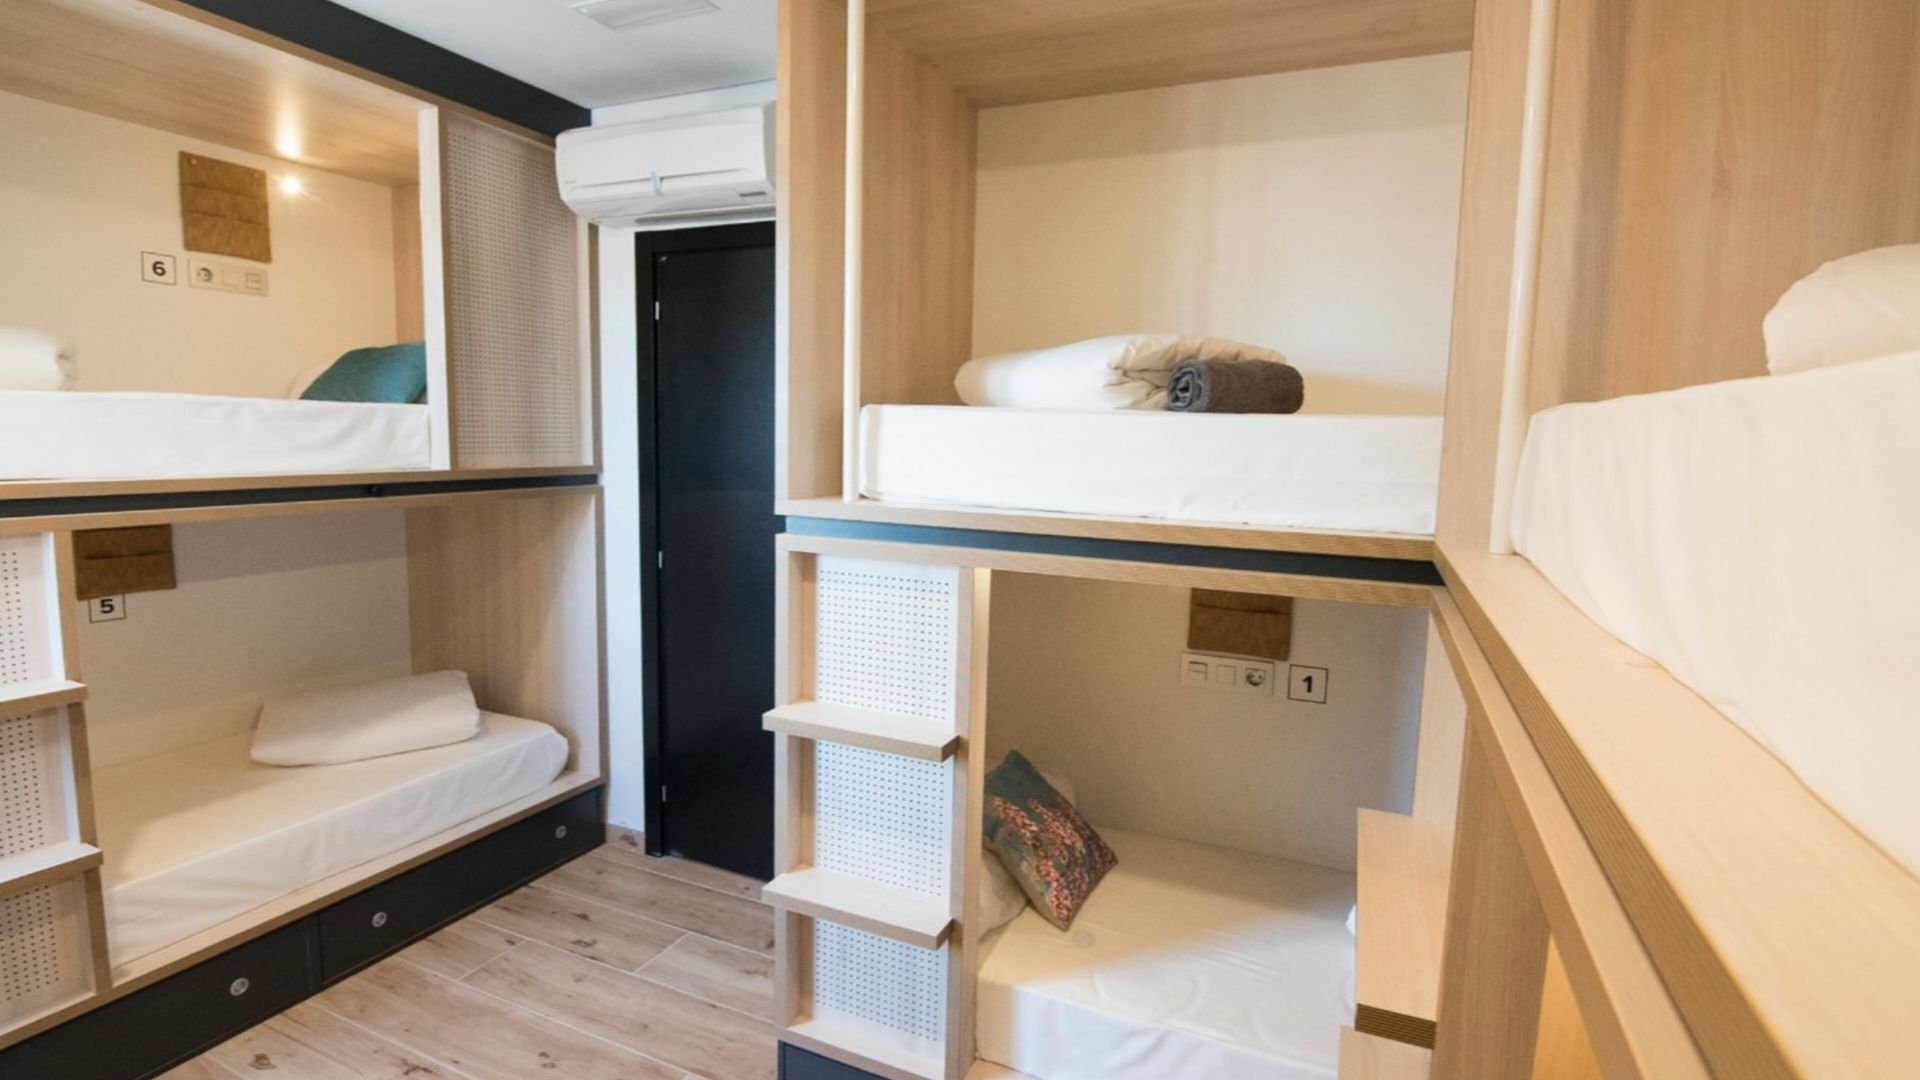 Room for 6 with shared bathroom